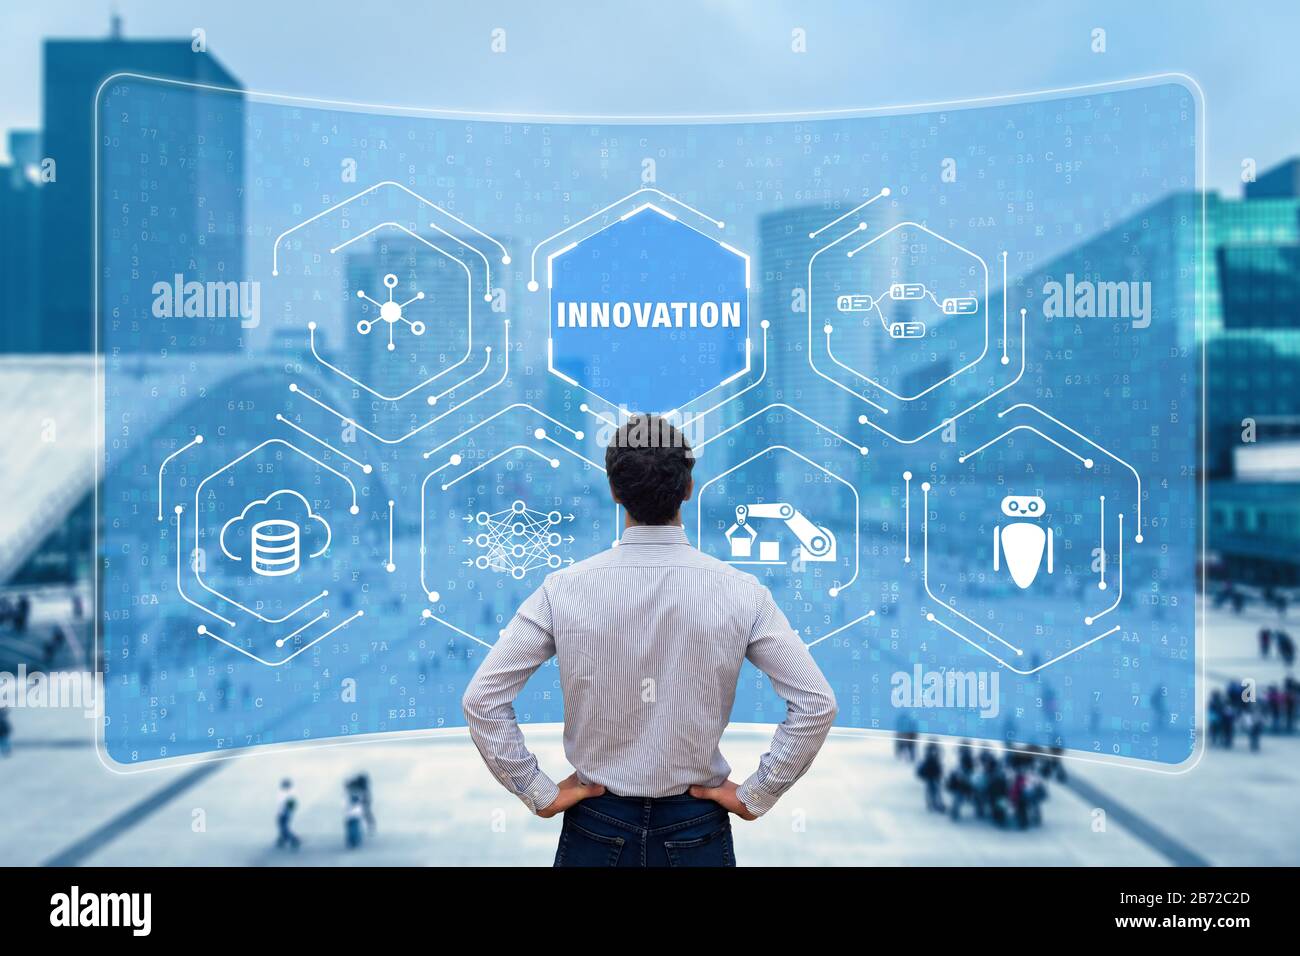 Innovation concept with researcher working on emerging technologies to develop innovative products. Digital disruption with IoT, robotic process autom Stock Photo